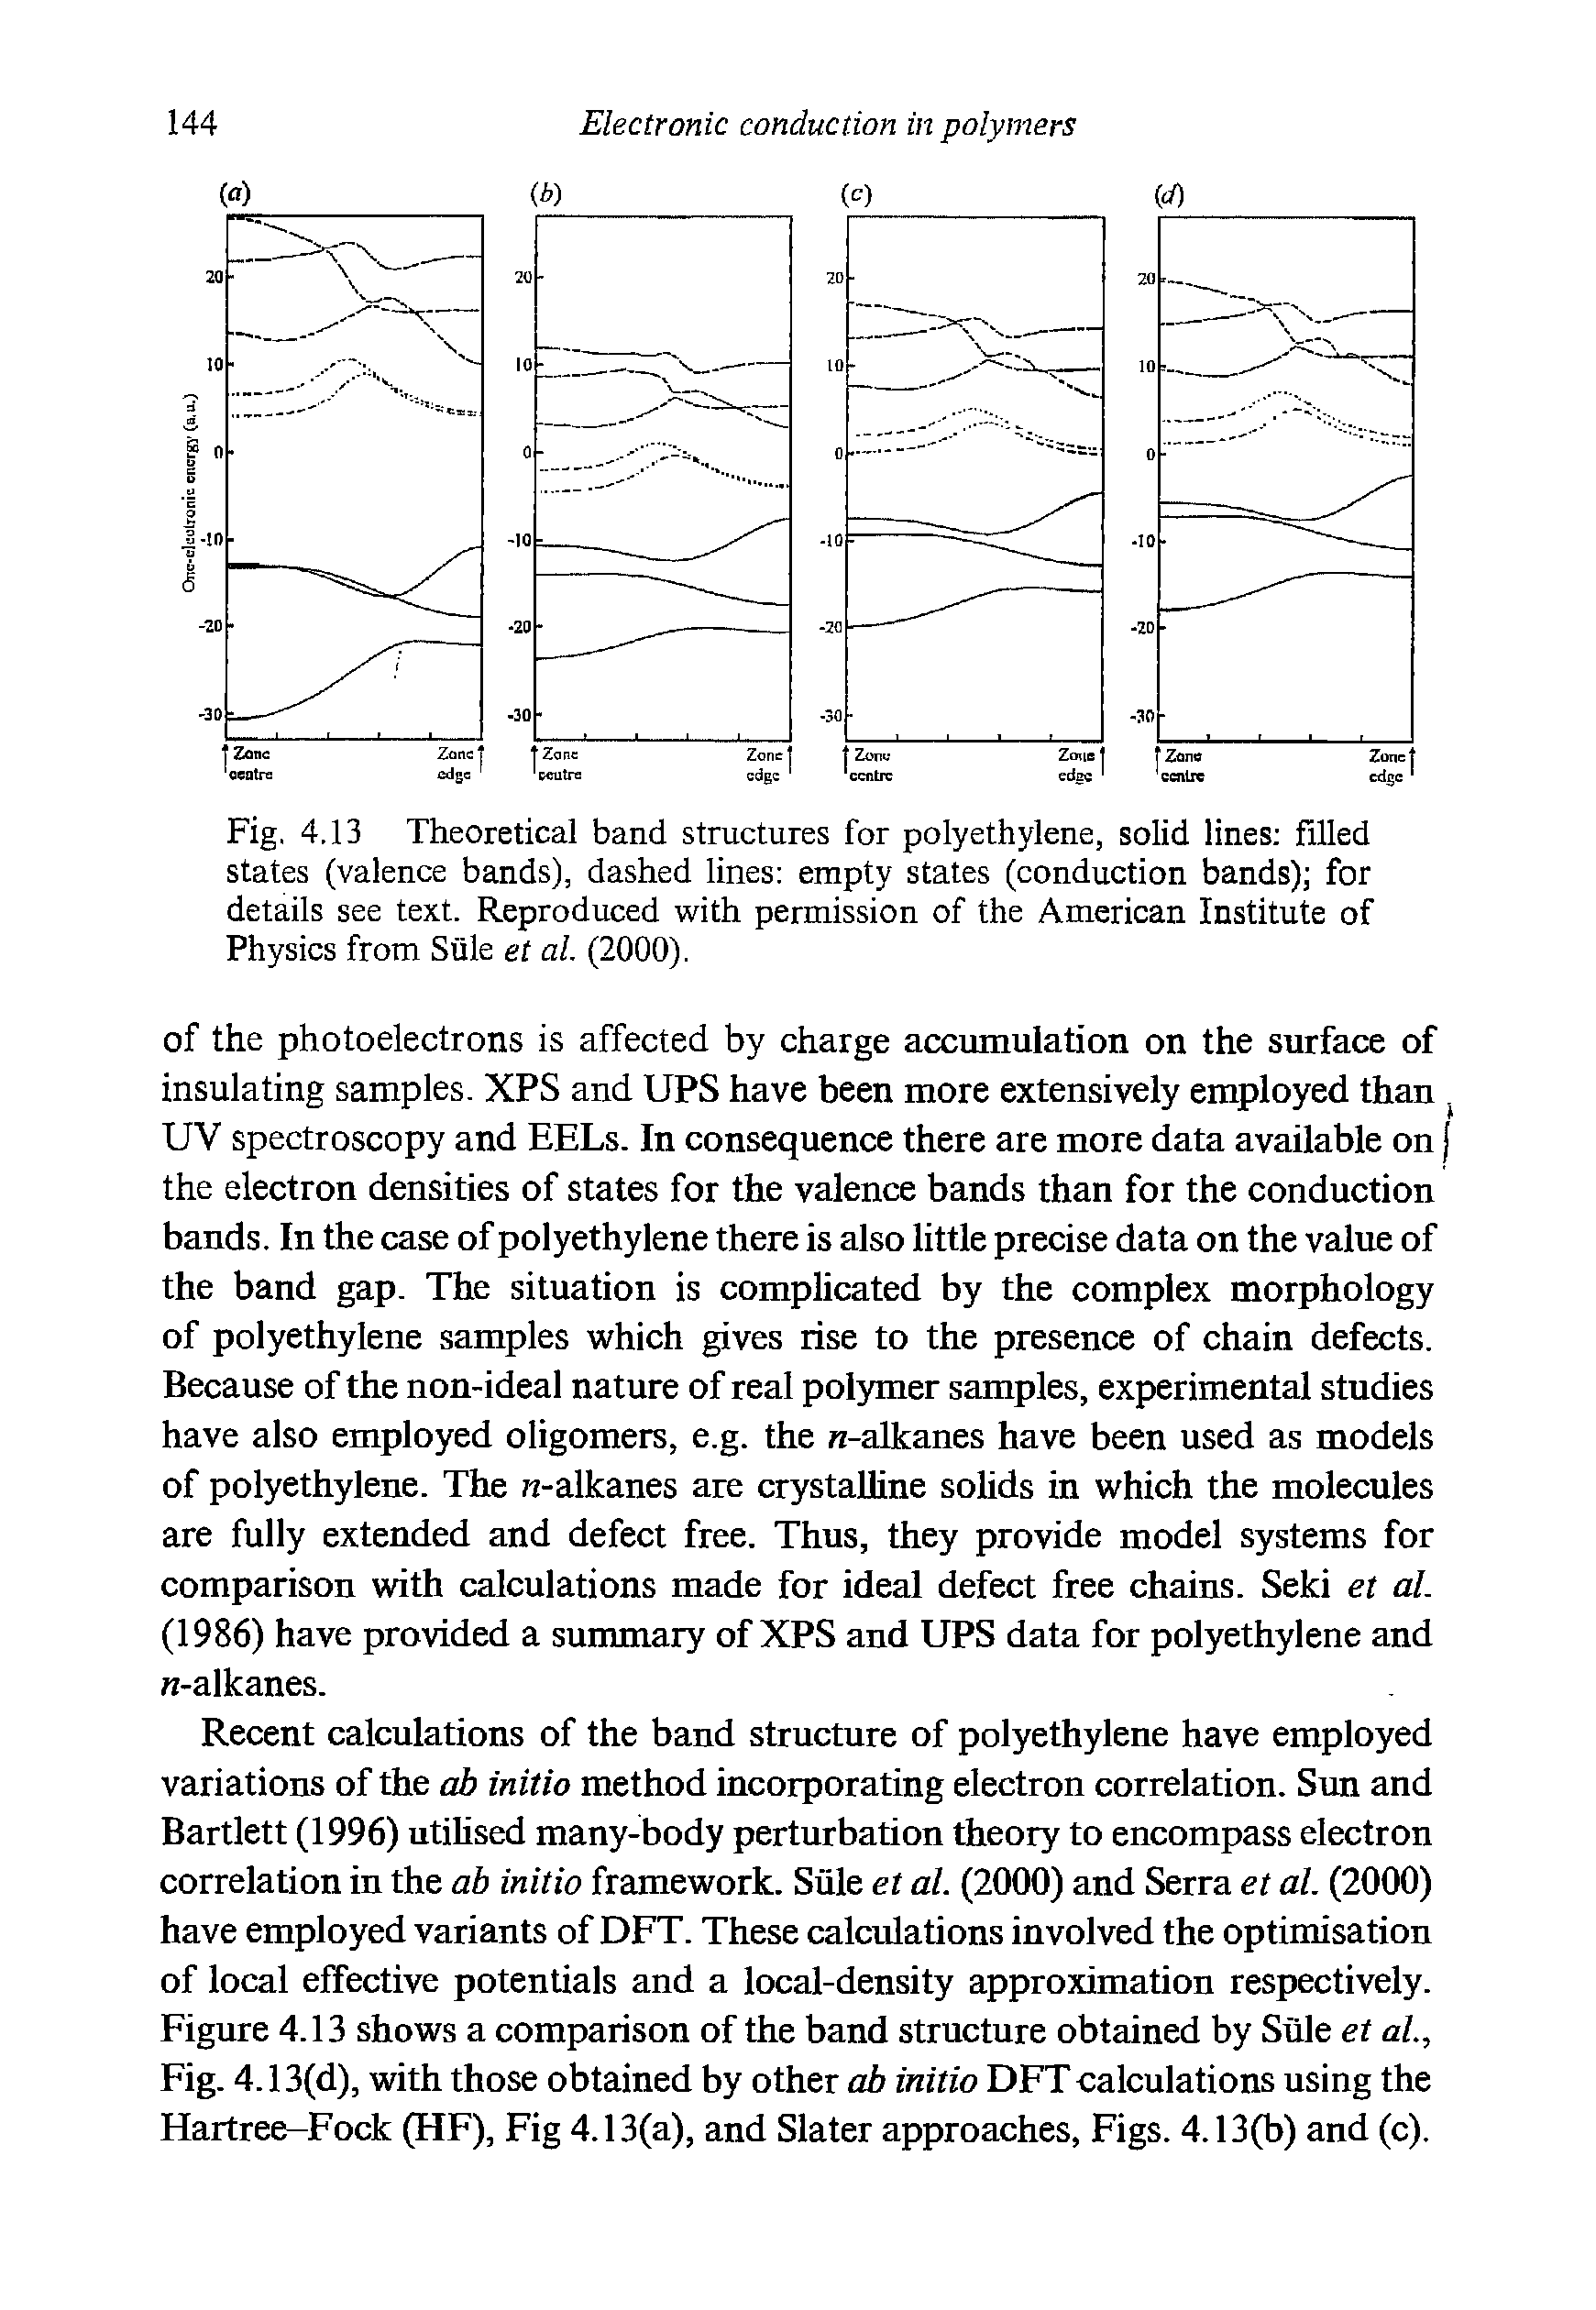 Fig. 4.13 Theoretical band structures for polyethylene, solid lines filled states (valence bands), dashed lines empty states (conduction bands) for details see text. Reproduced with permission of the American Institute of Physics from Stile et al. (2000).